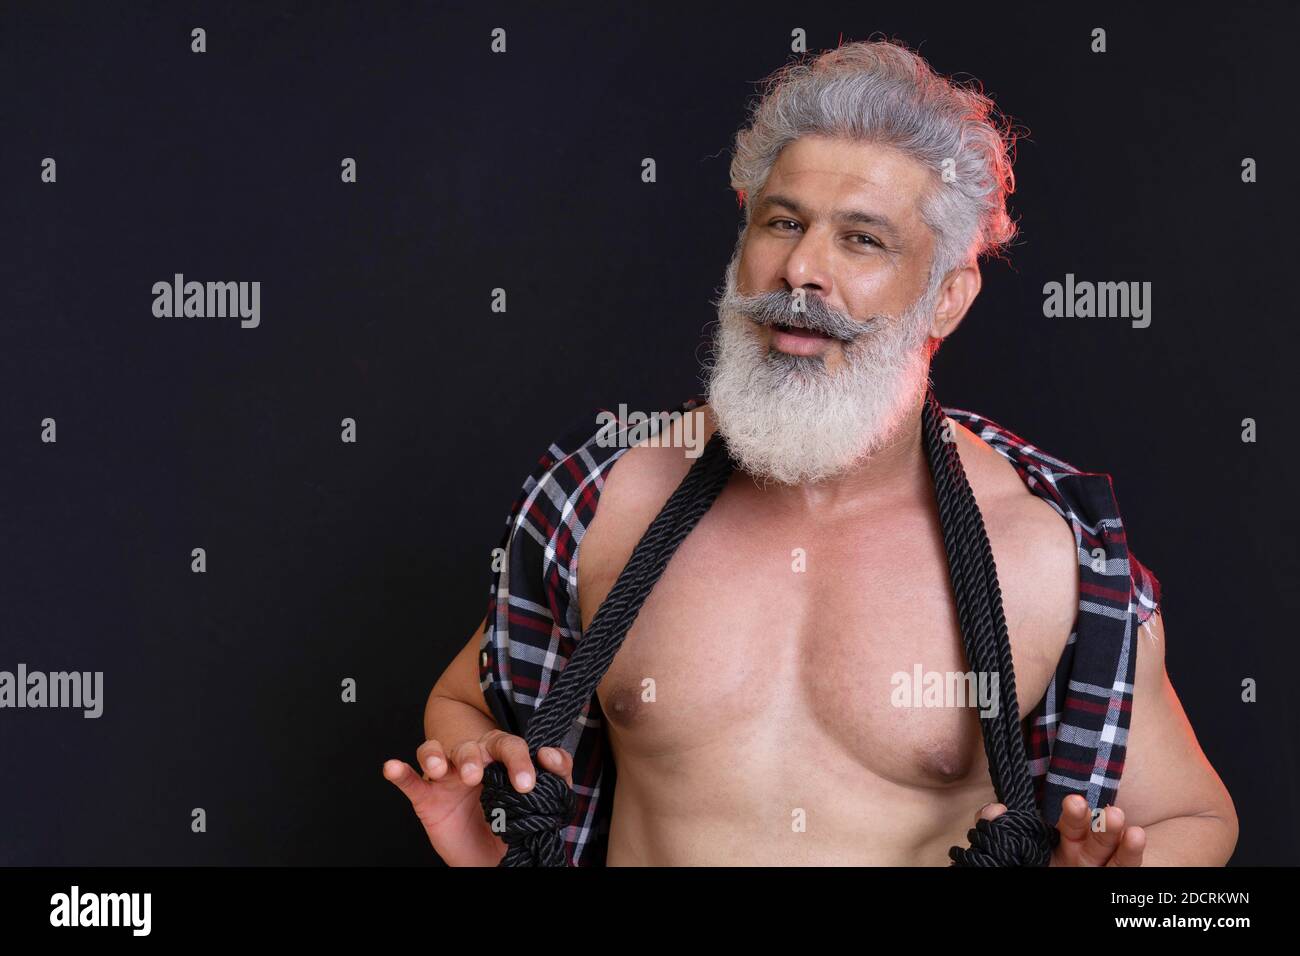 Man with long white beard, muscular body. Looking at camera. Black  background Stock Photo - Alamy